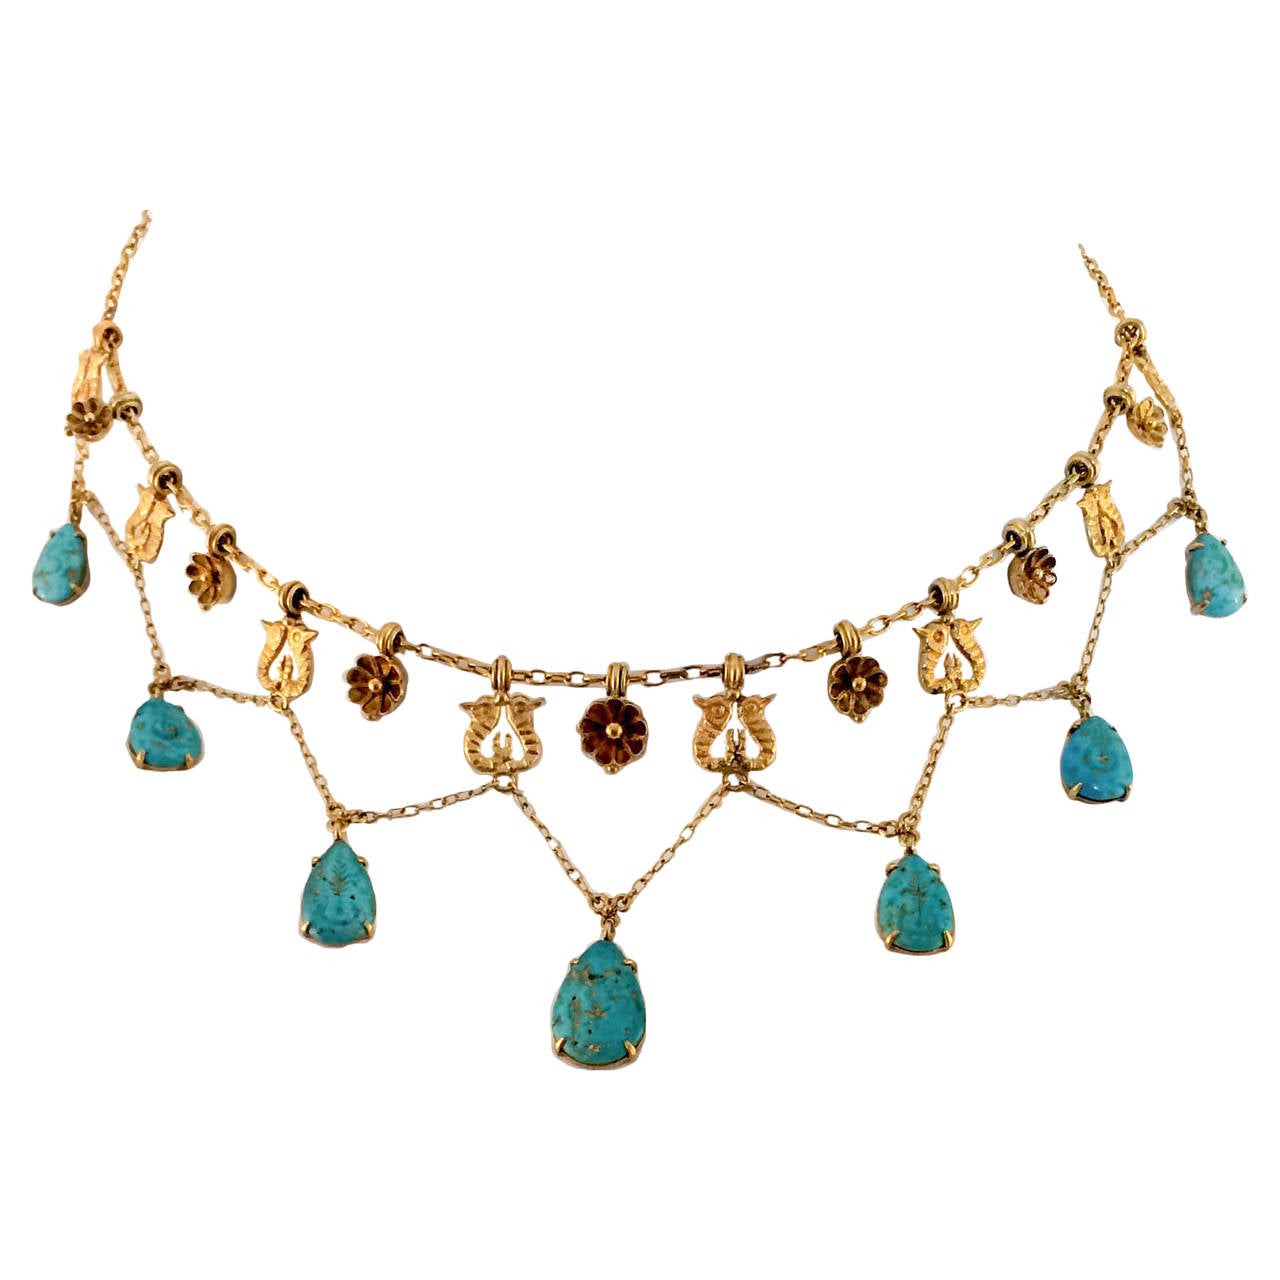 Turquoise and Gold Necklace - 1920s